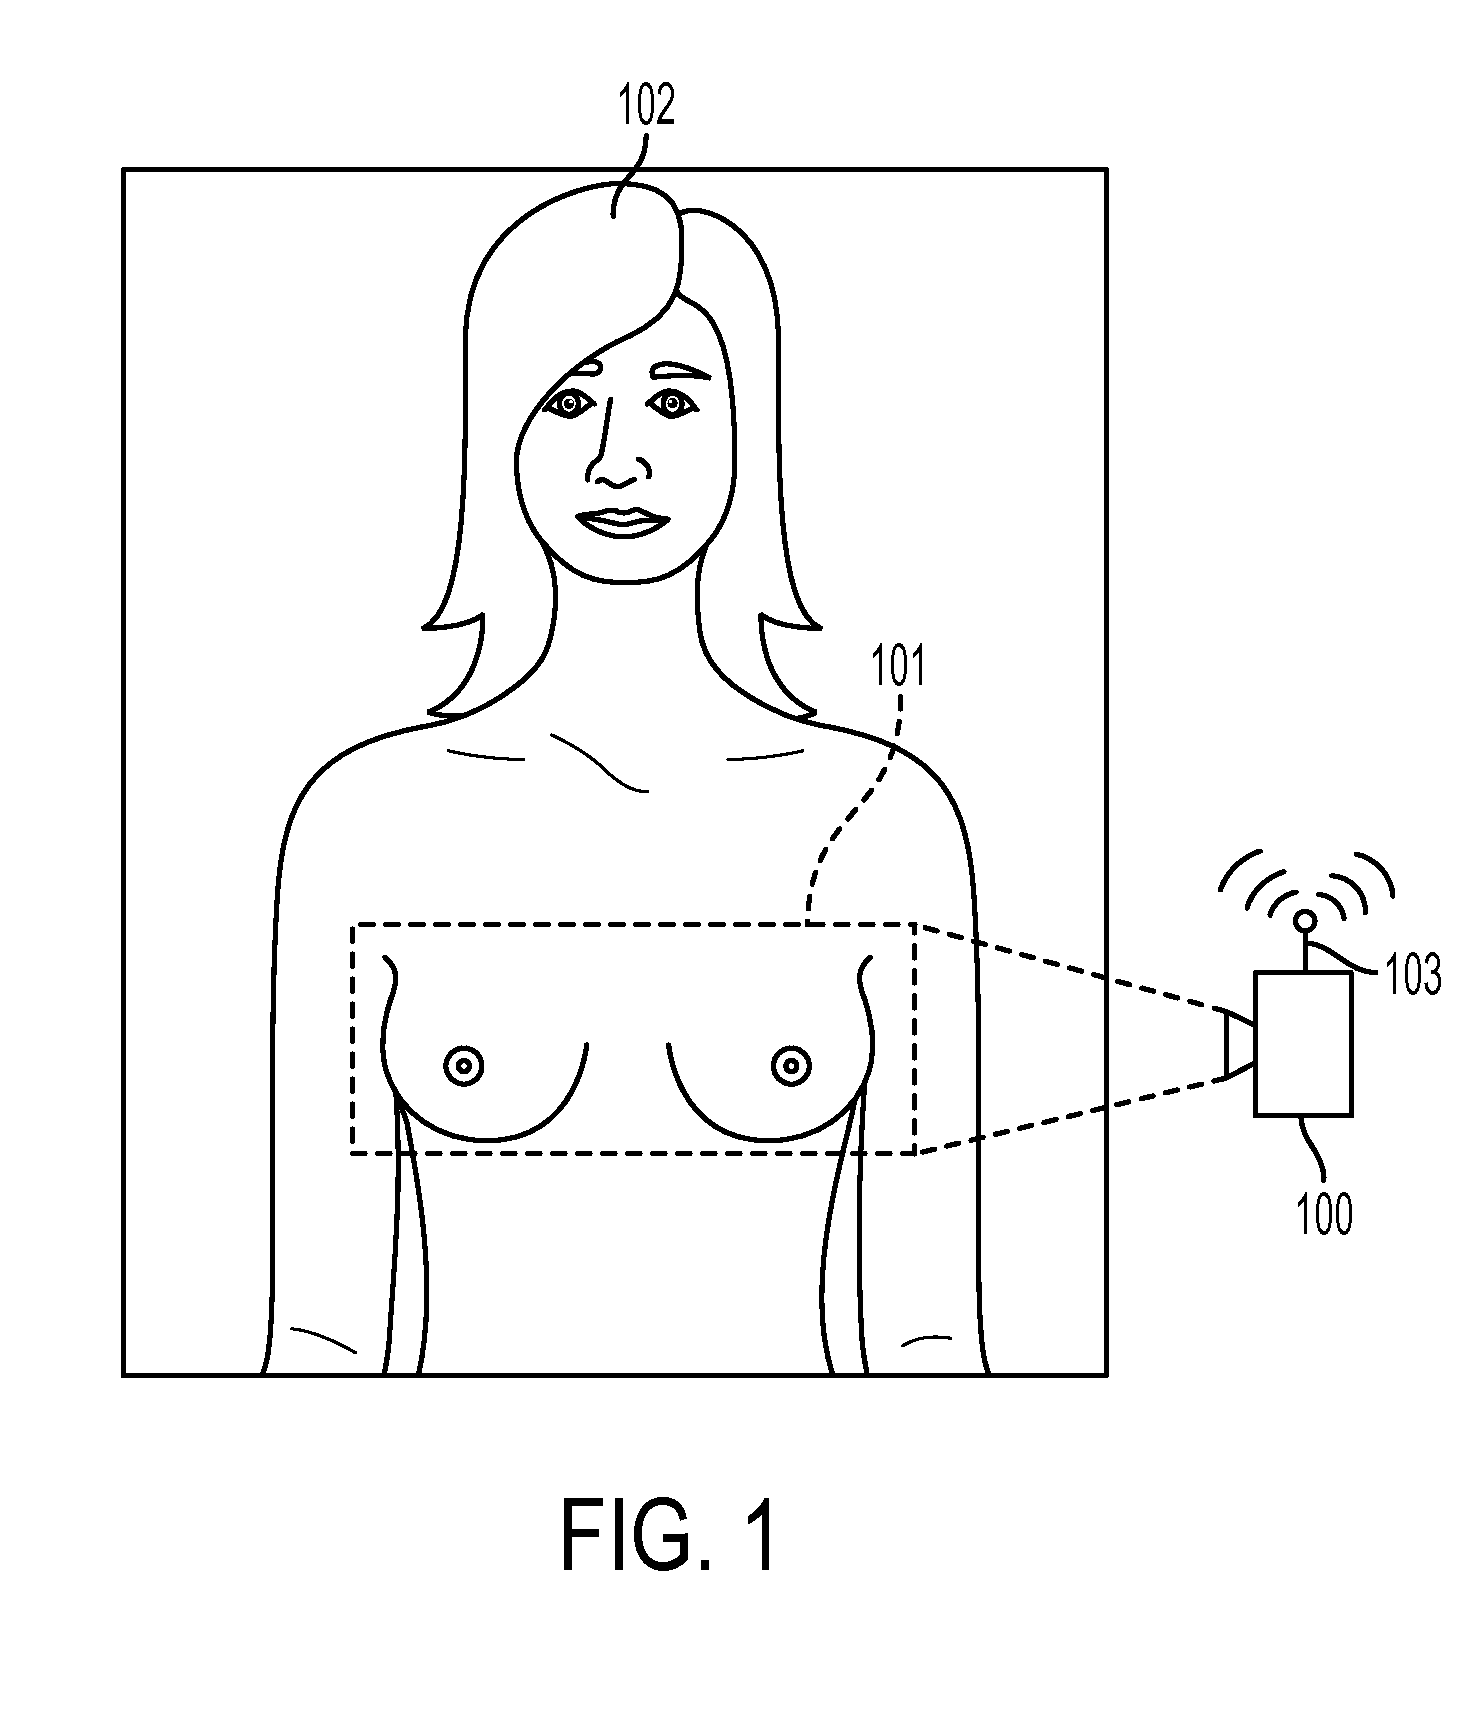 Detecting tumorous breast tissue in a thermal image